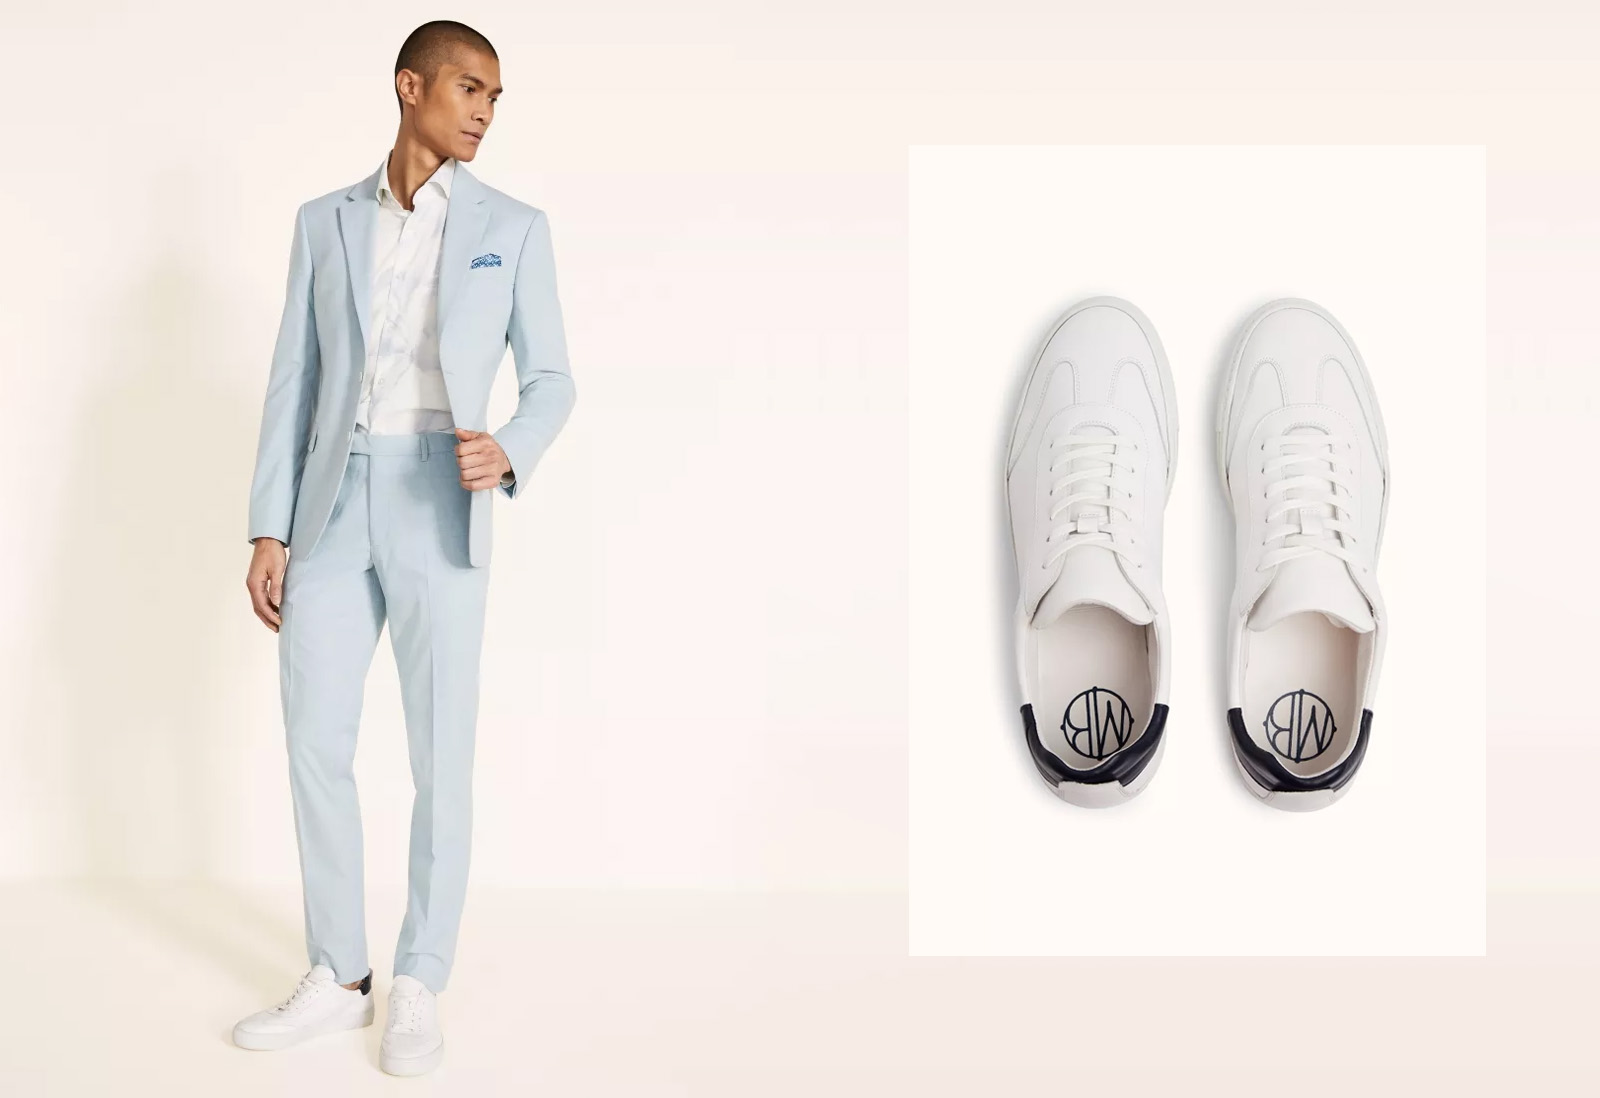 A smart casual suit and white trainers.